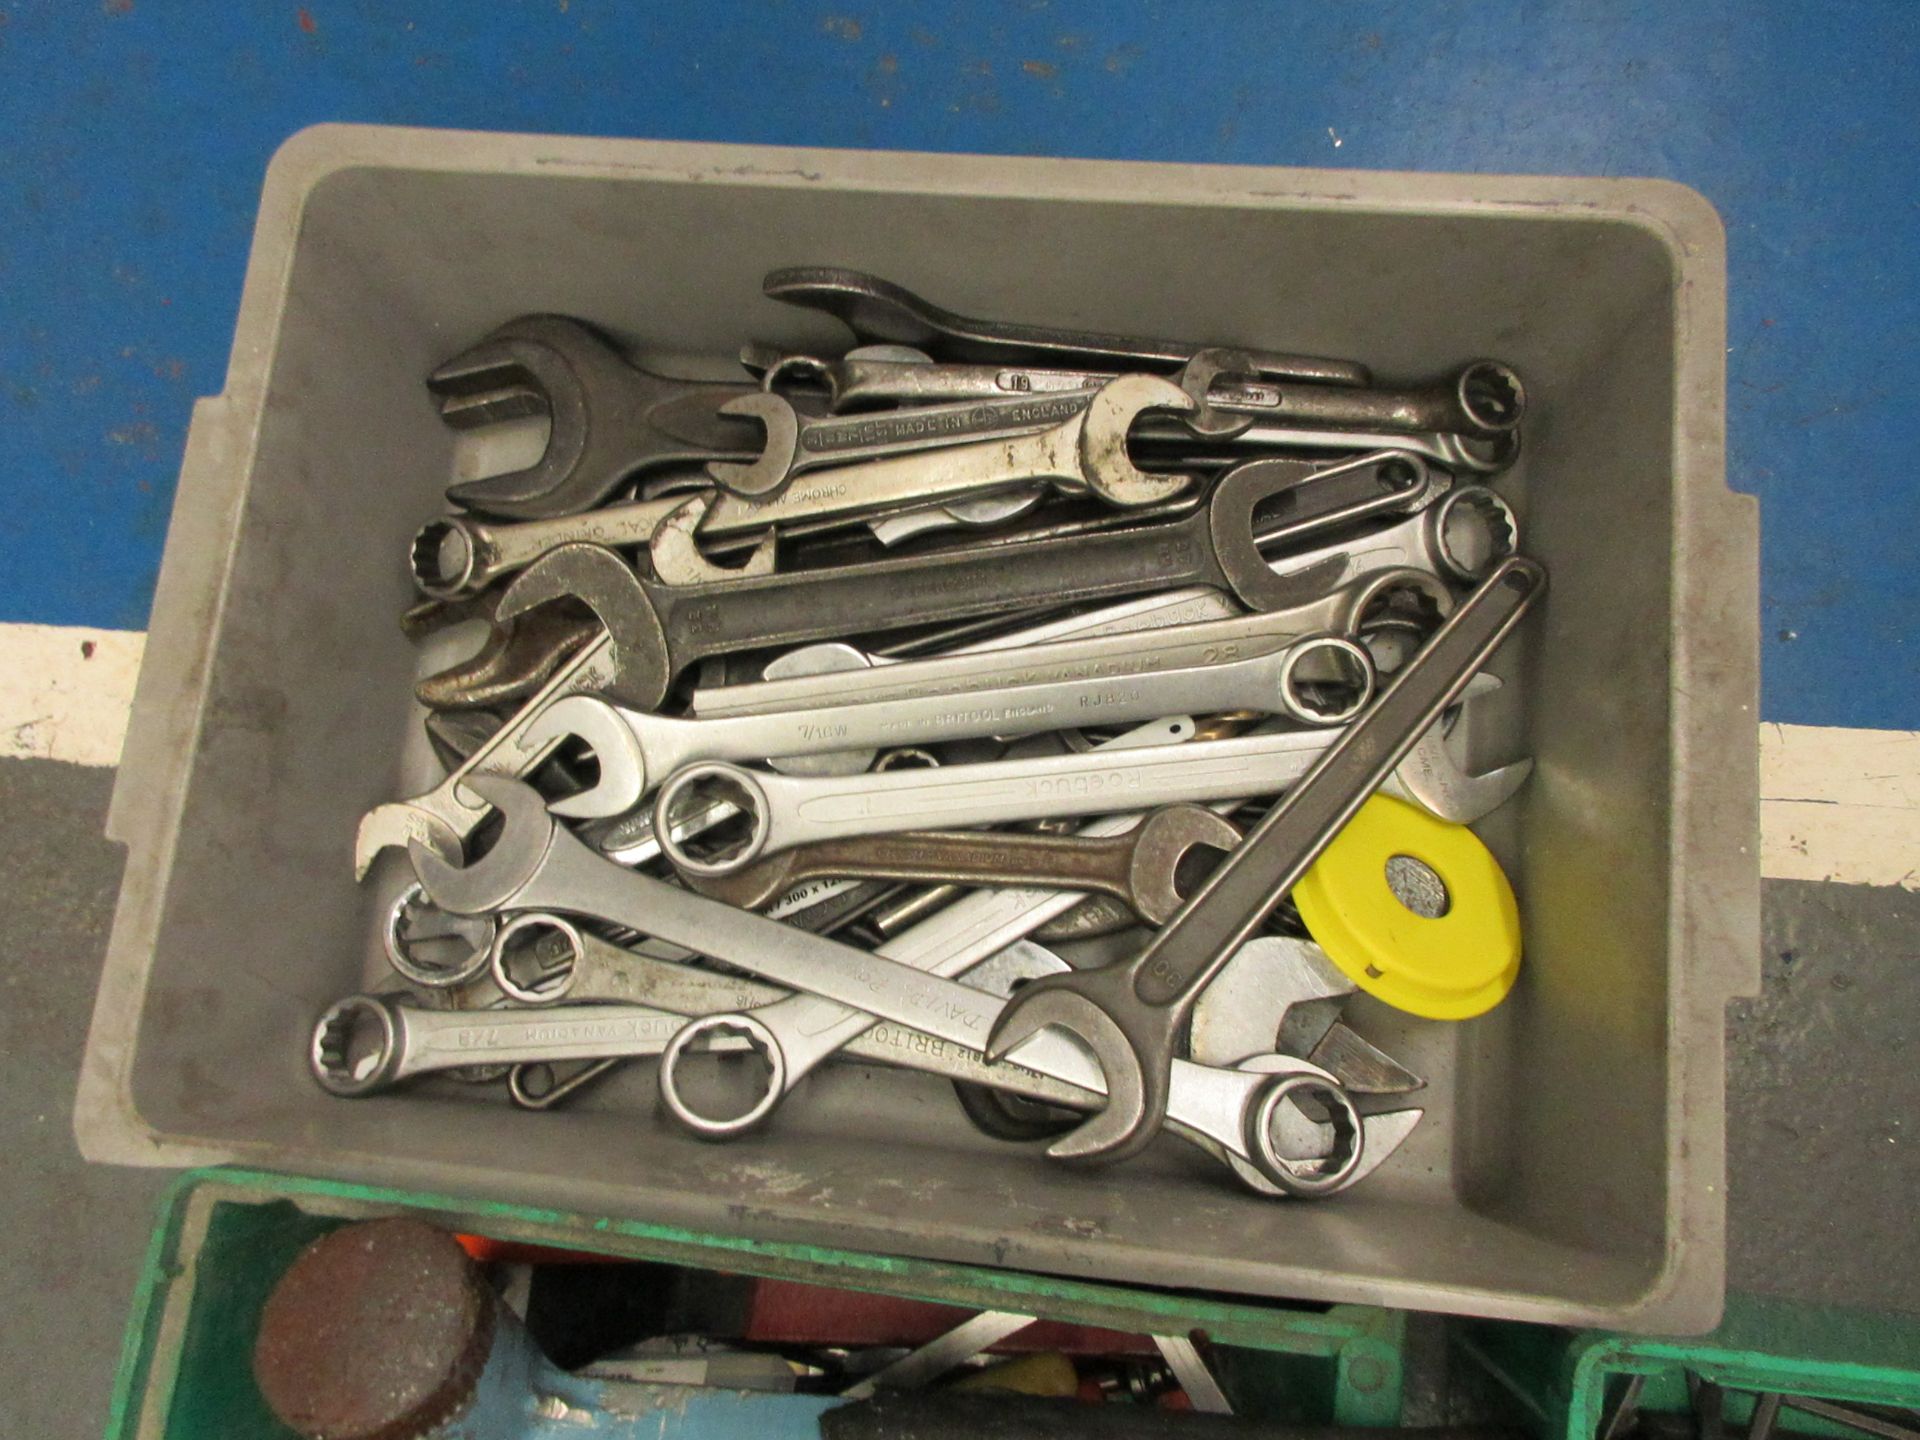 Assorted hand tools including spanners, allen keys, mallets, etc. - Image 2 of 6